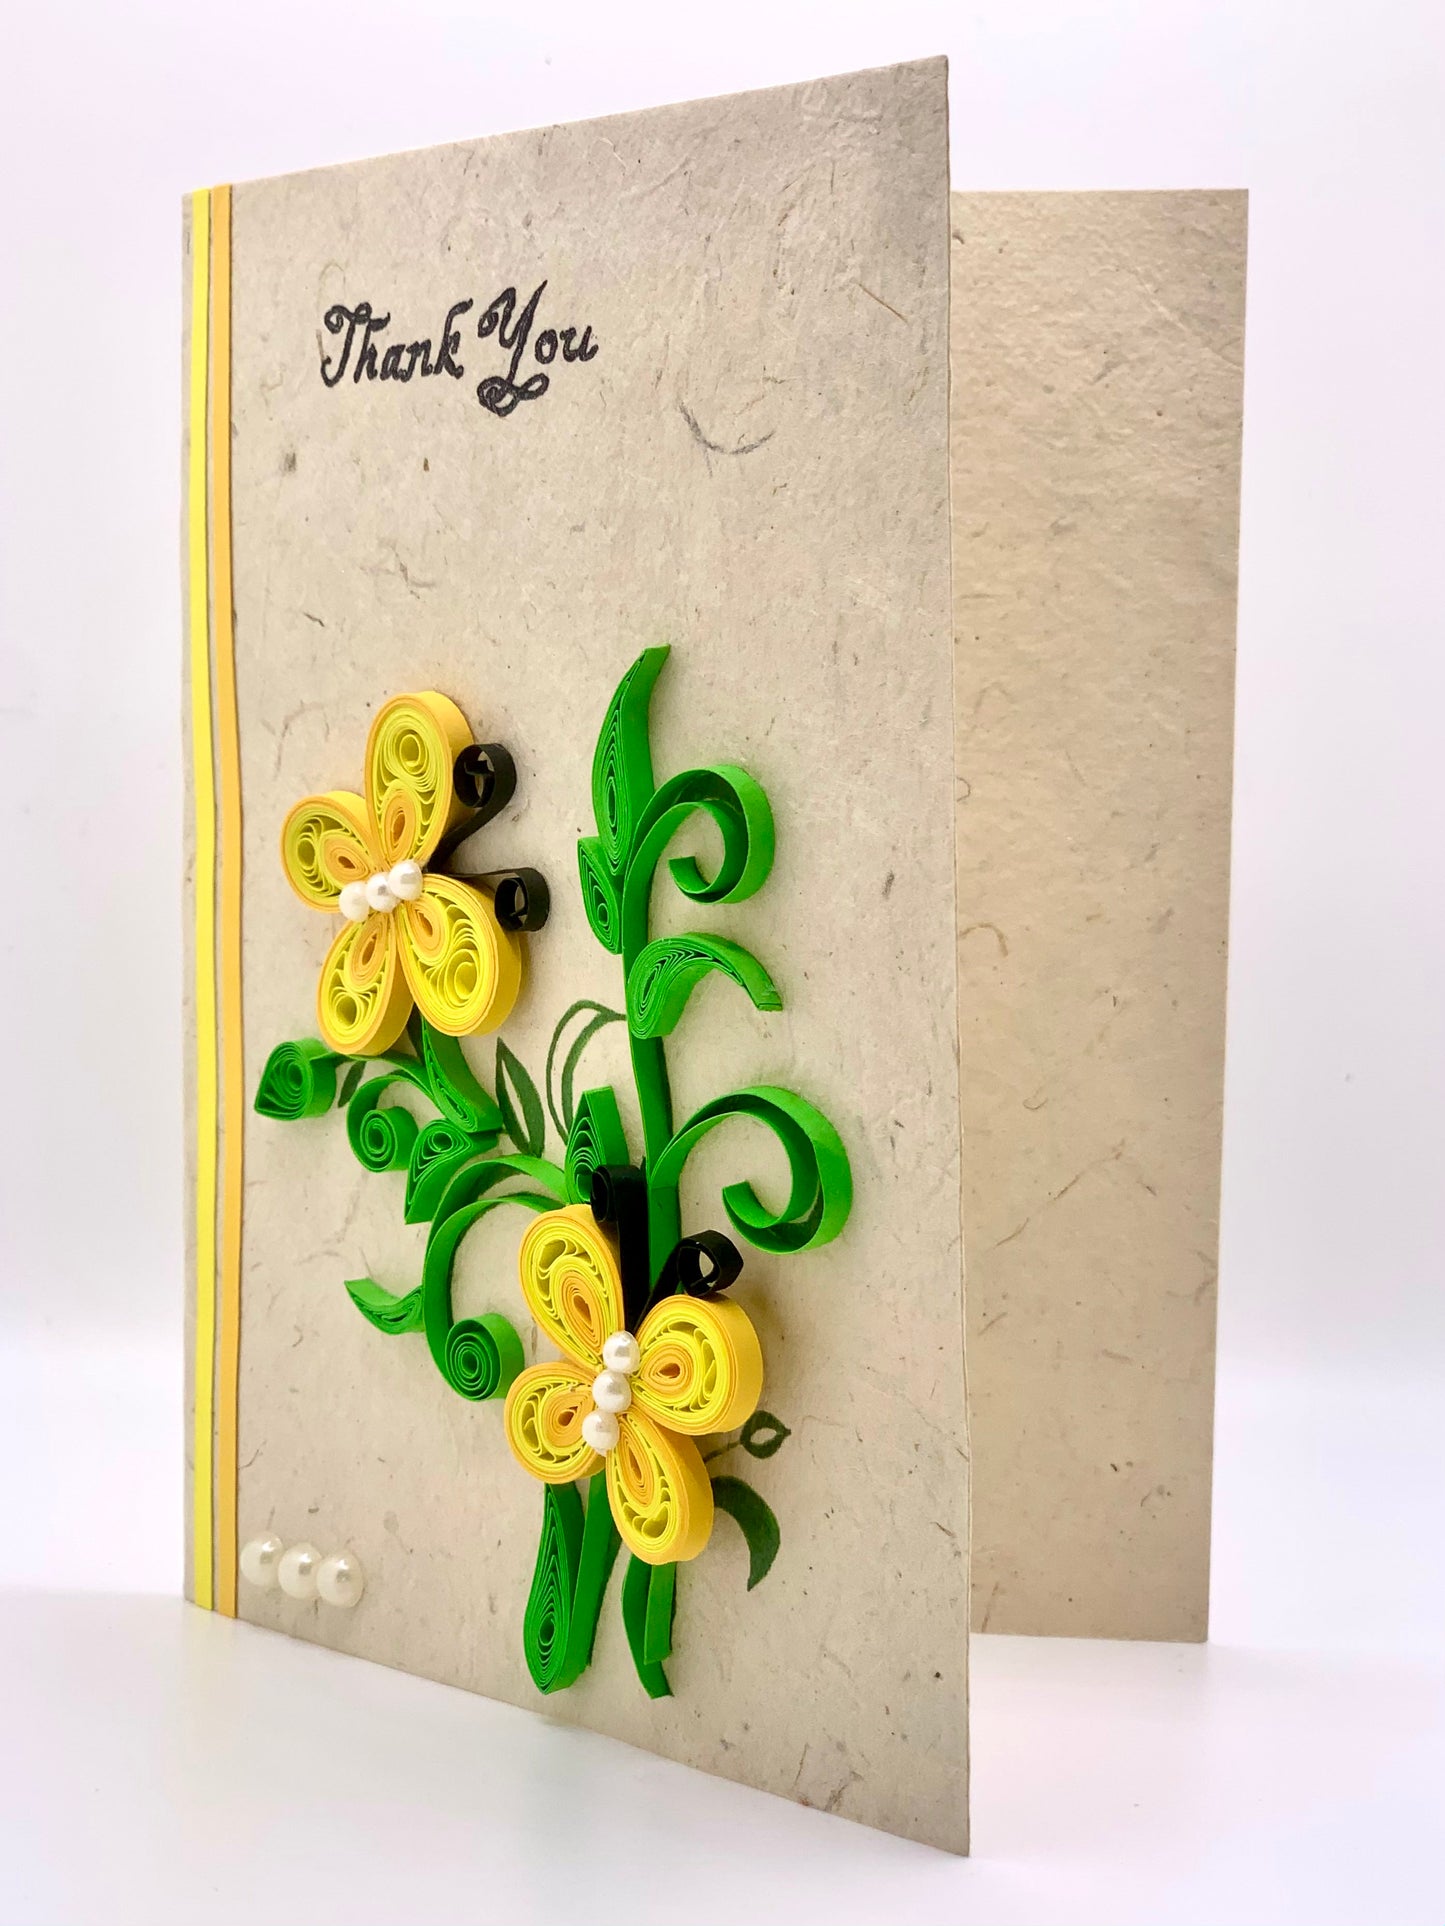 Thank You - Quilled Butterfly Greeting Card